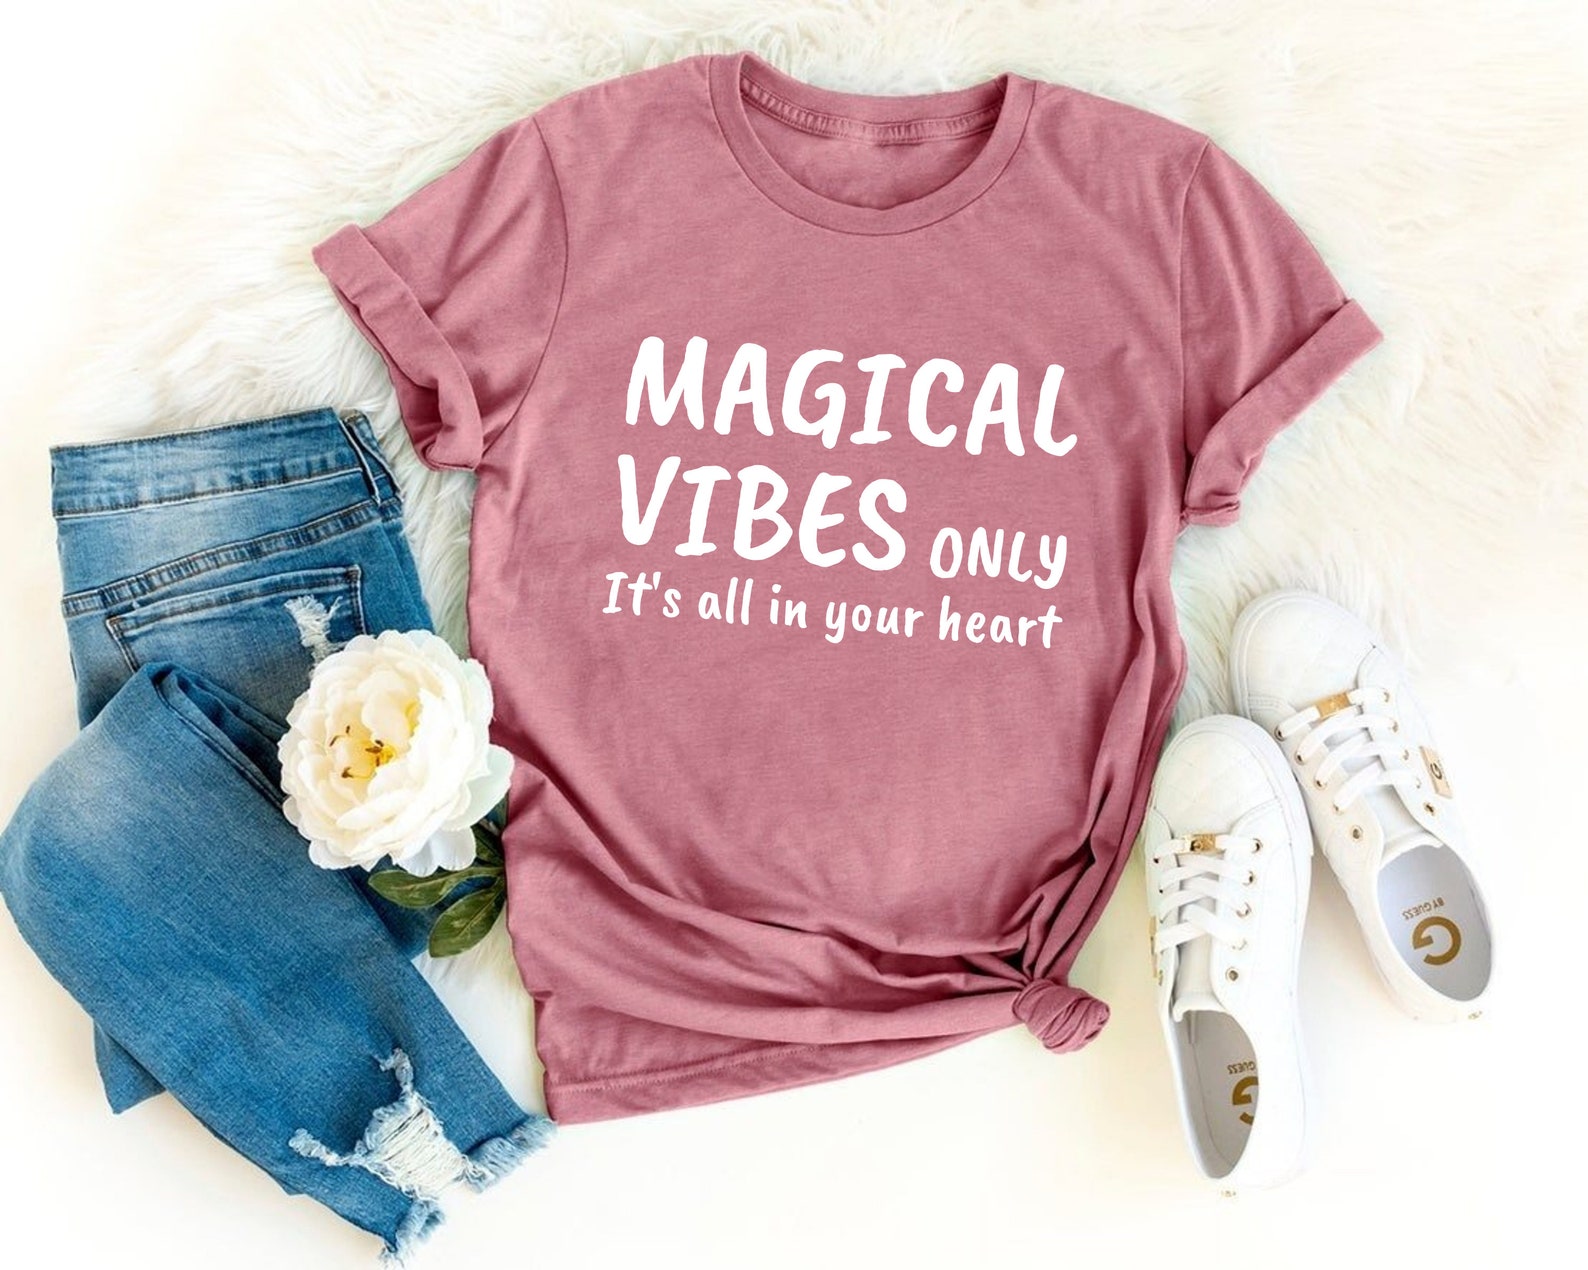 Magical Vibes Only T-Shirt Inspirational Womens Gift Mental | Etsy